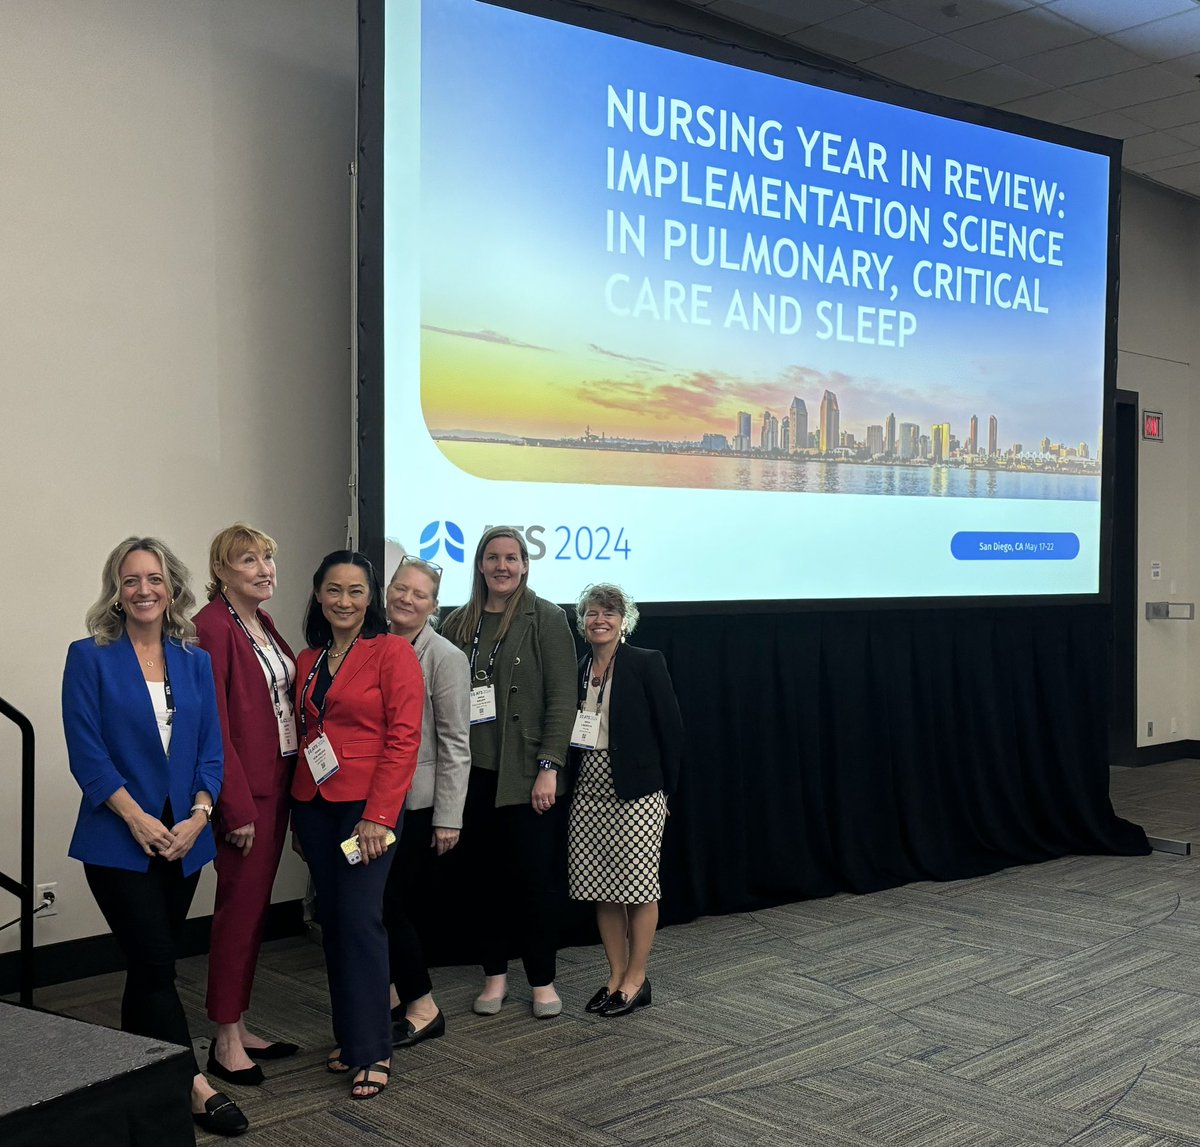 @atscommunity Nursing Year in Review is getting started - excited to hear these experts discuss #implementationscience. @ATSNursing